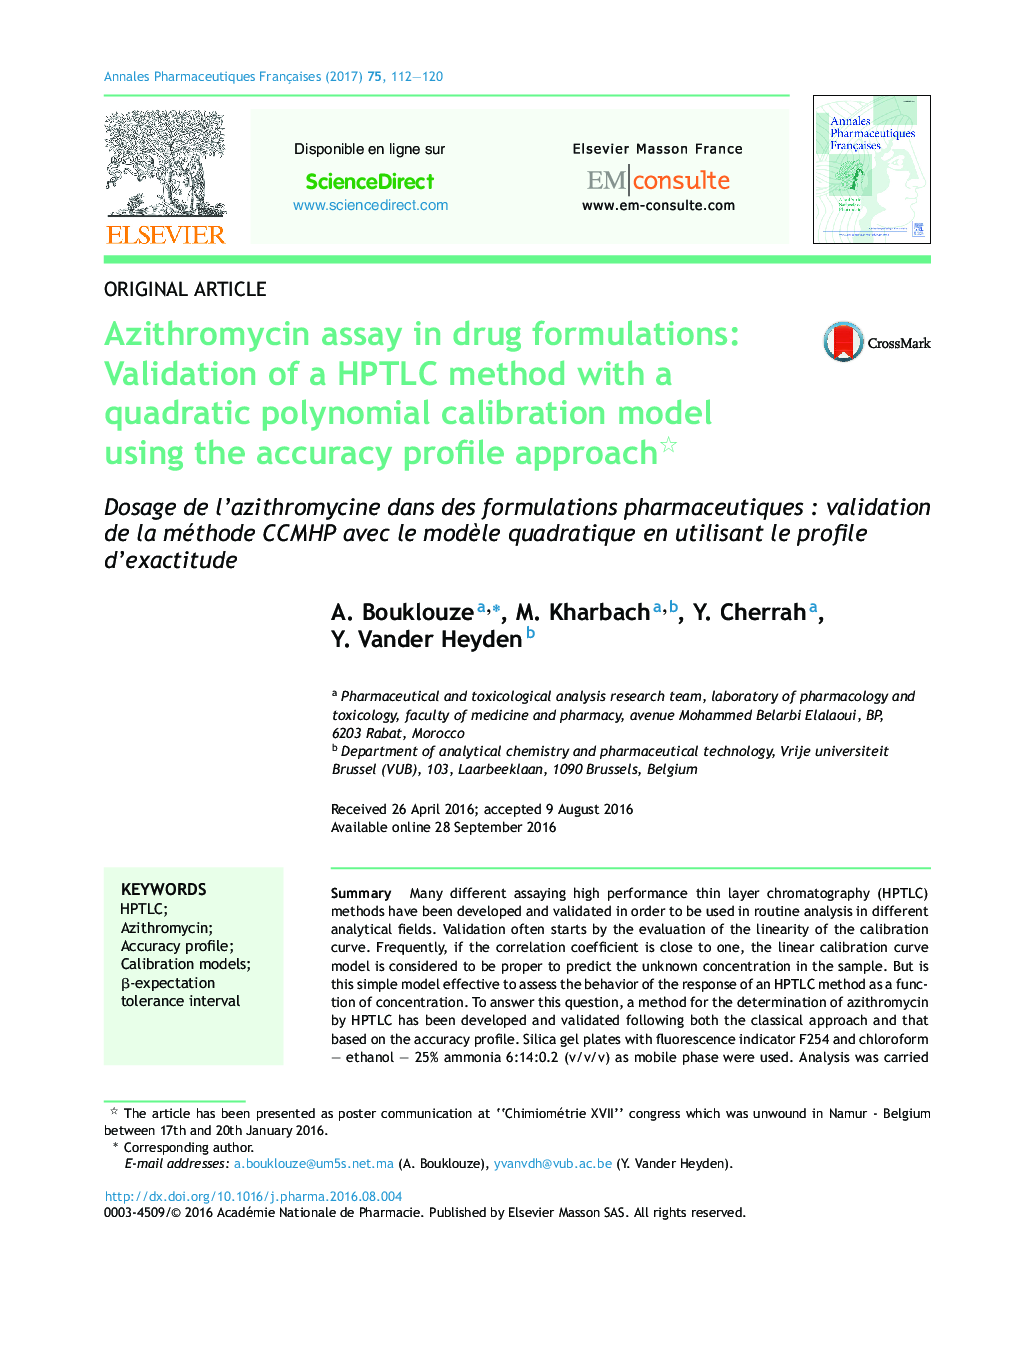 Azithromycin assay in drug formulations: Validation of a HPTLC method with a quadratic polynomial calibration model using the accuracy profile approach